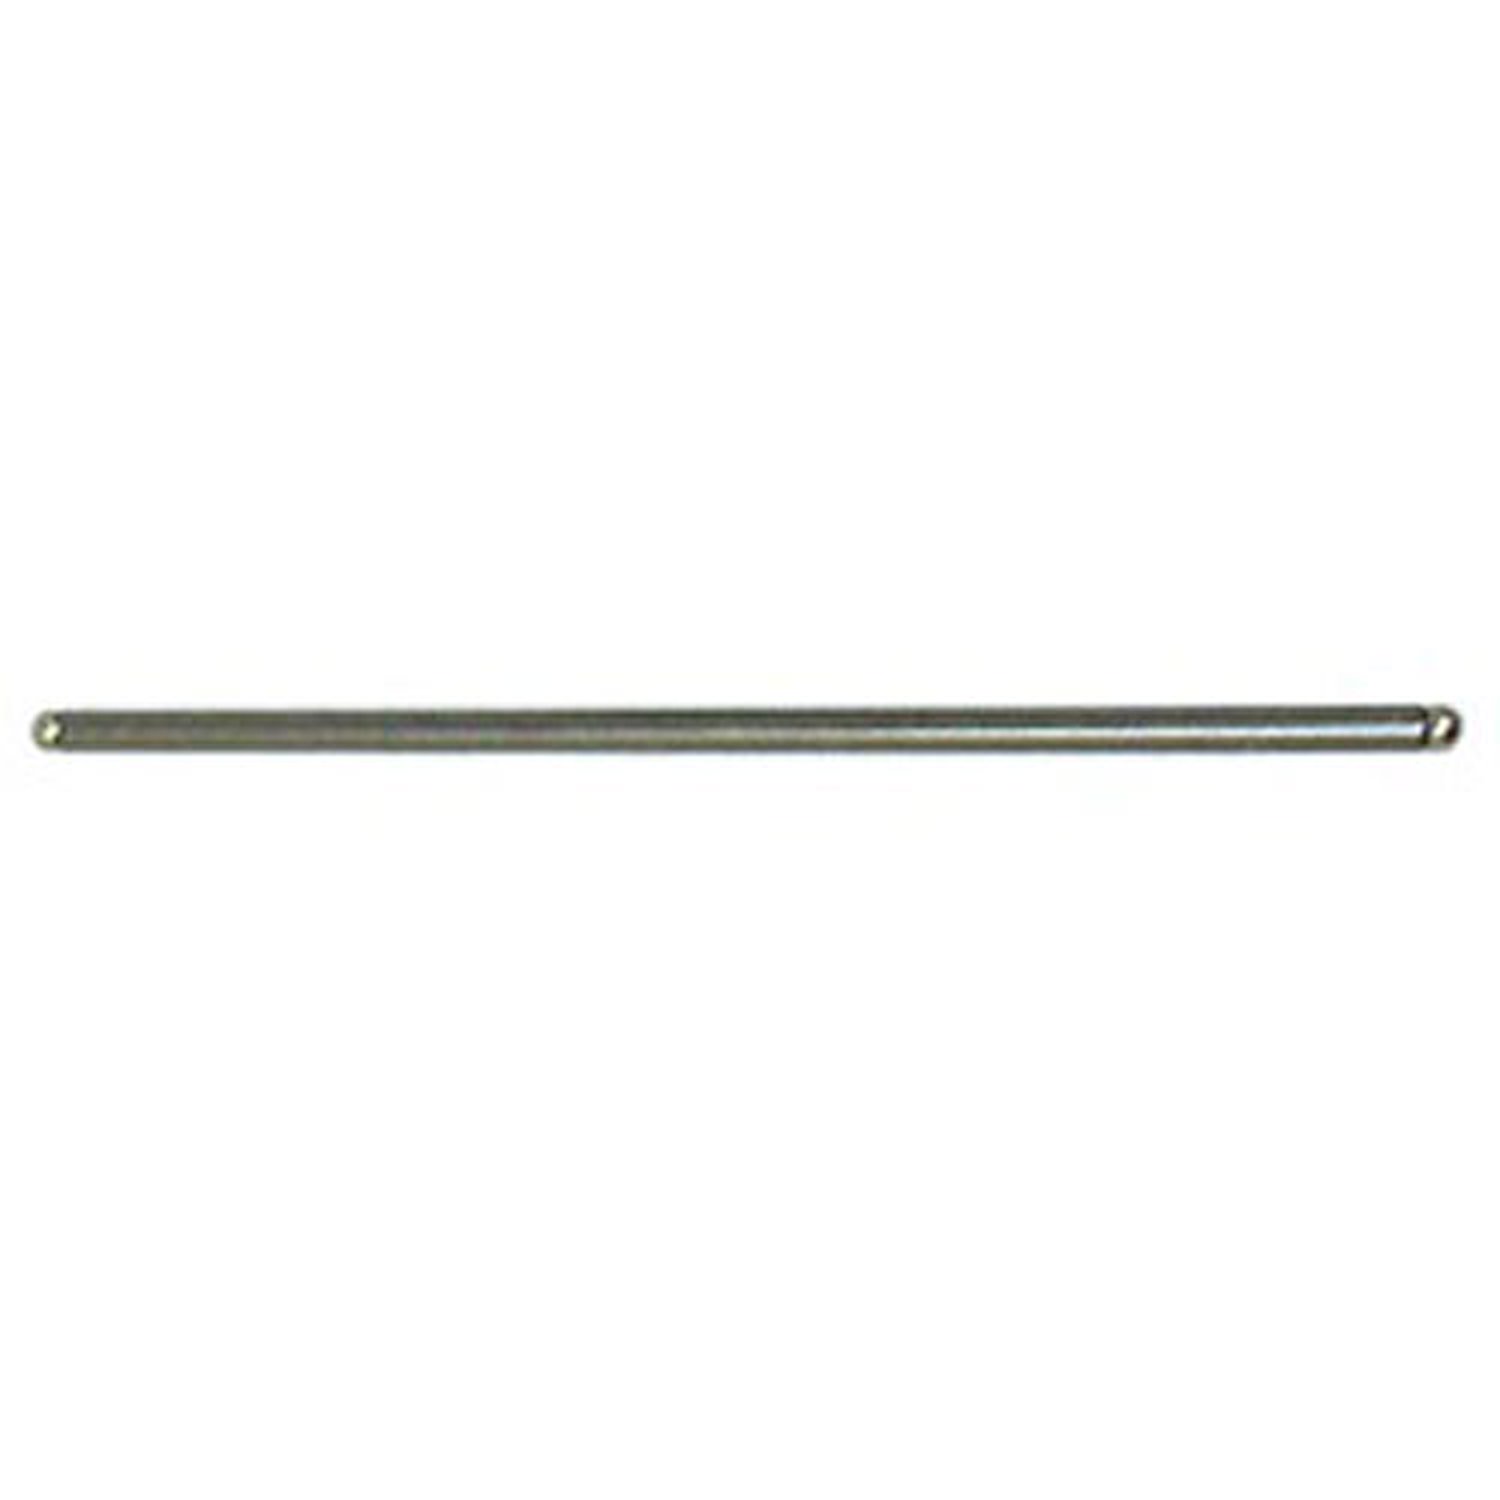 This engine push rod from Omix-ADA fits 3.8L engines found in 07-11 Jeep Wrangler models.